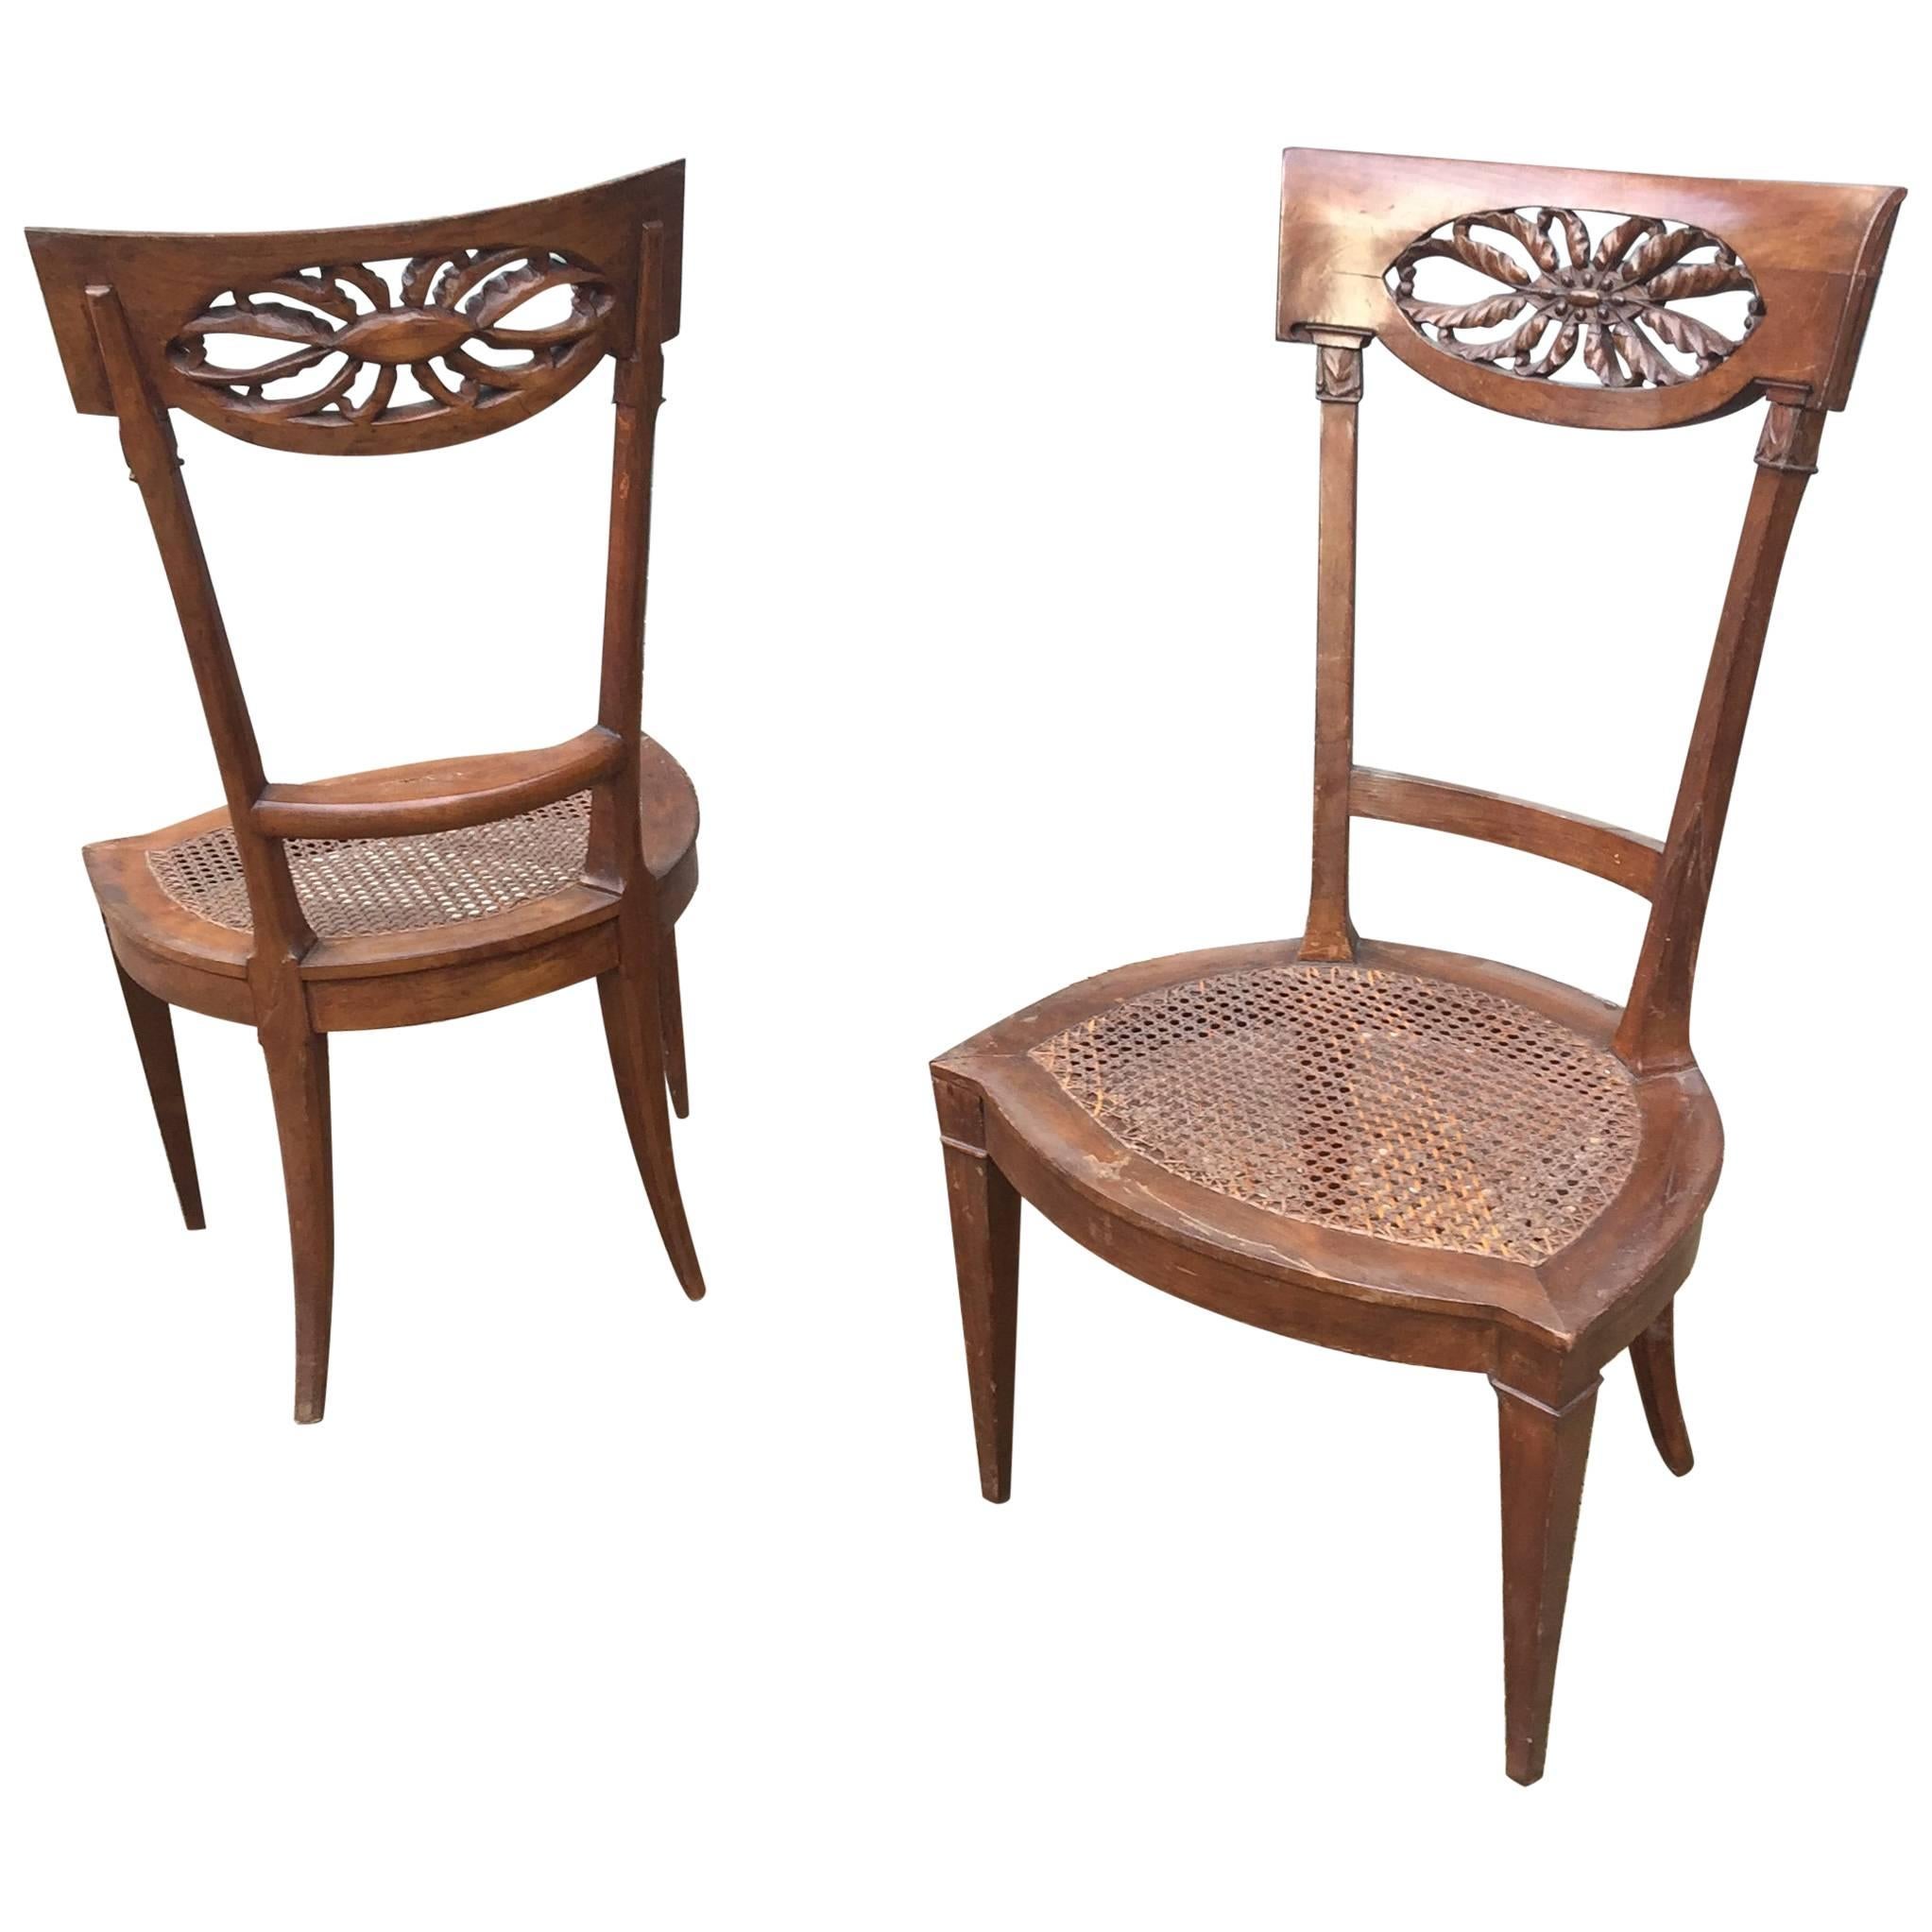 Pair of Ancient Cherry Wood Chairs, 18th Century